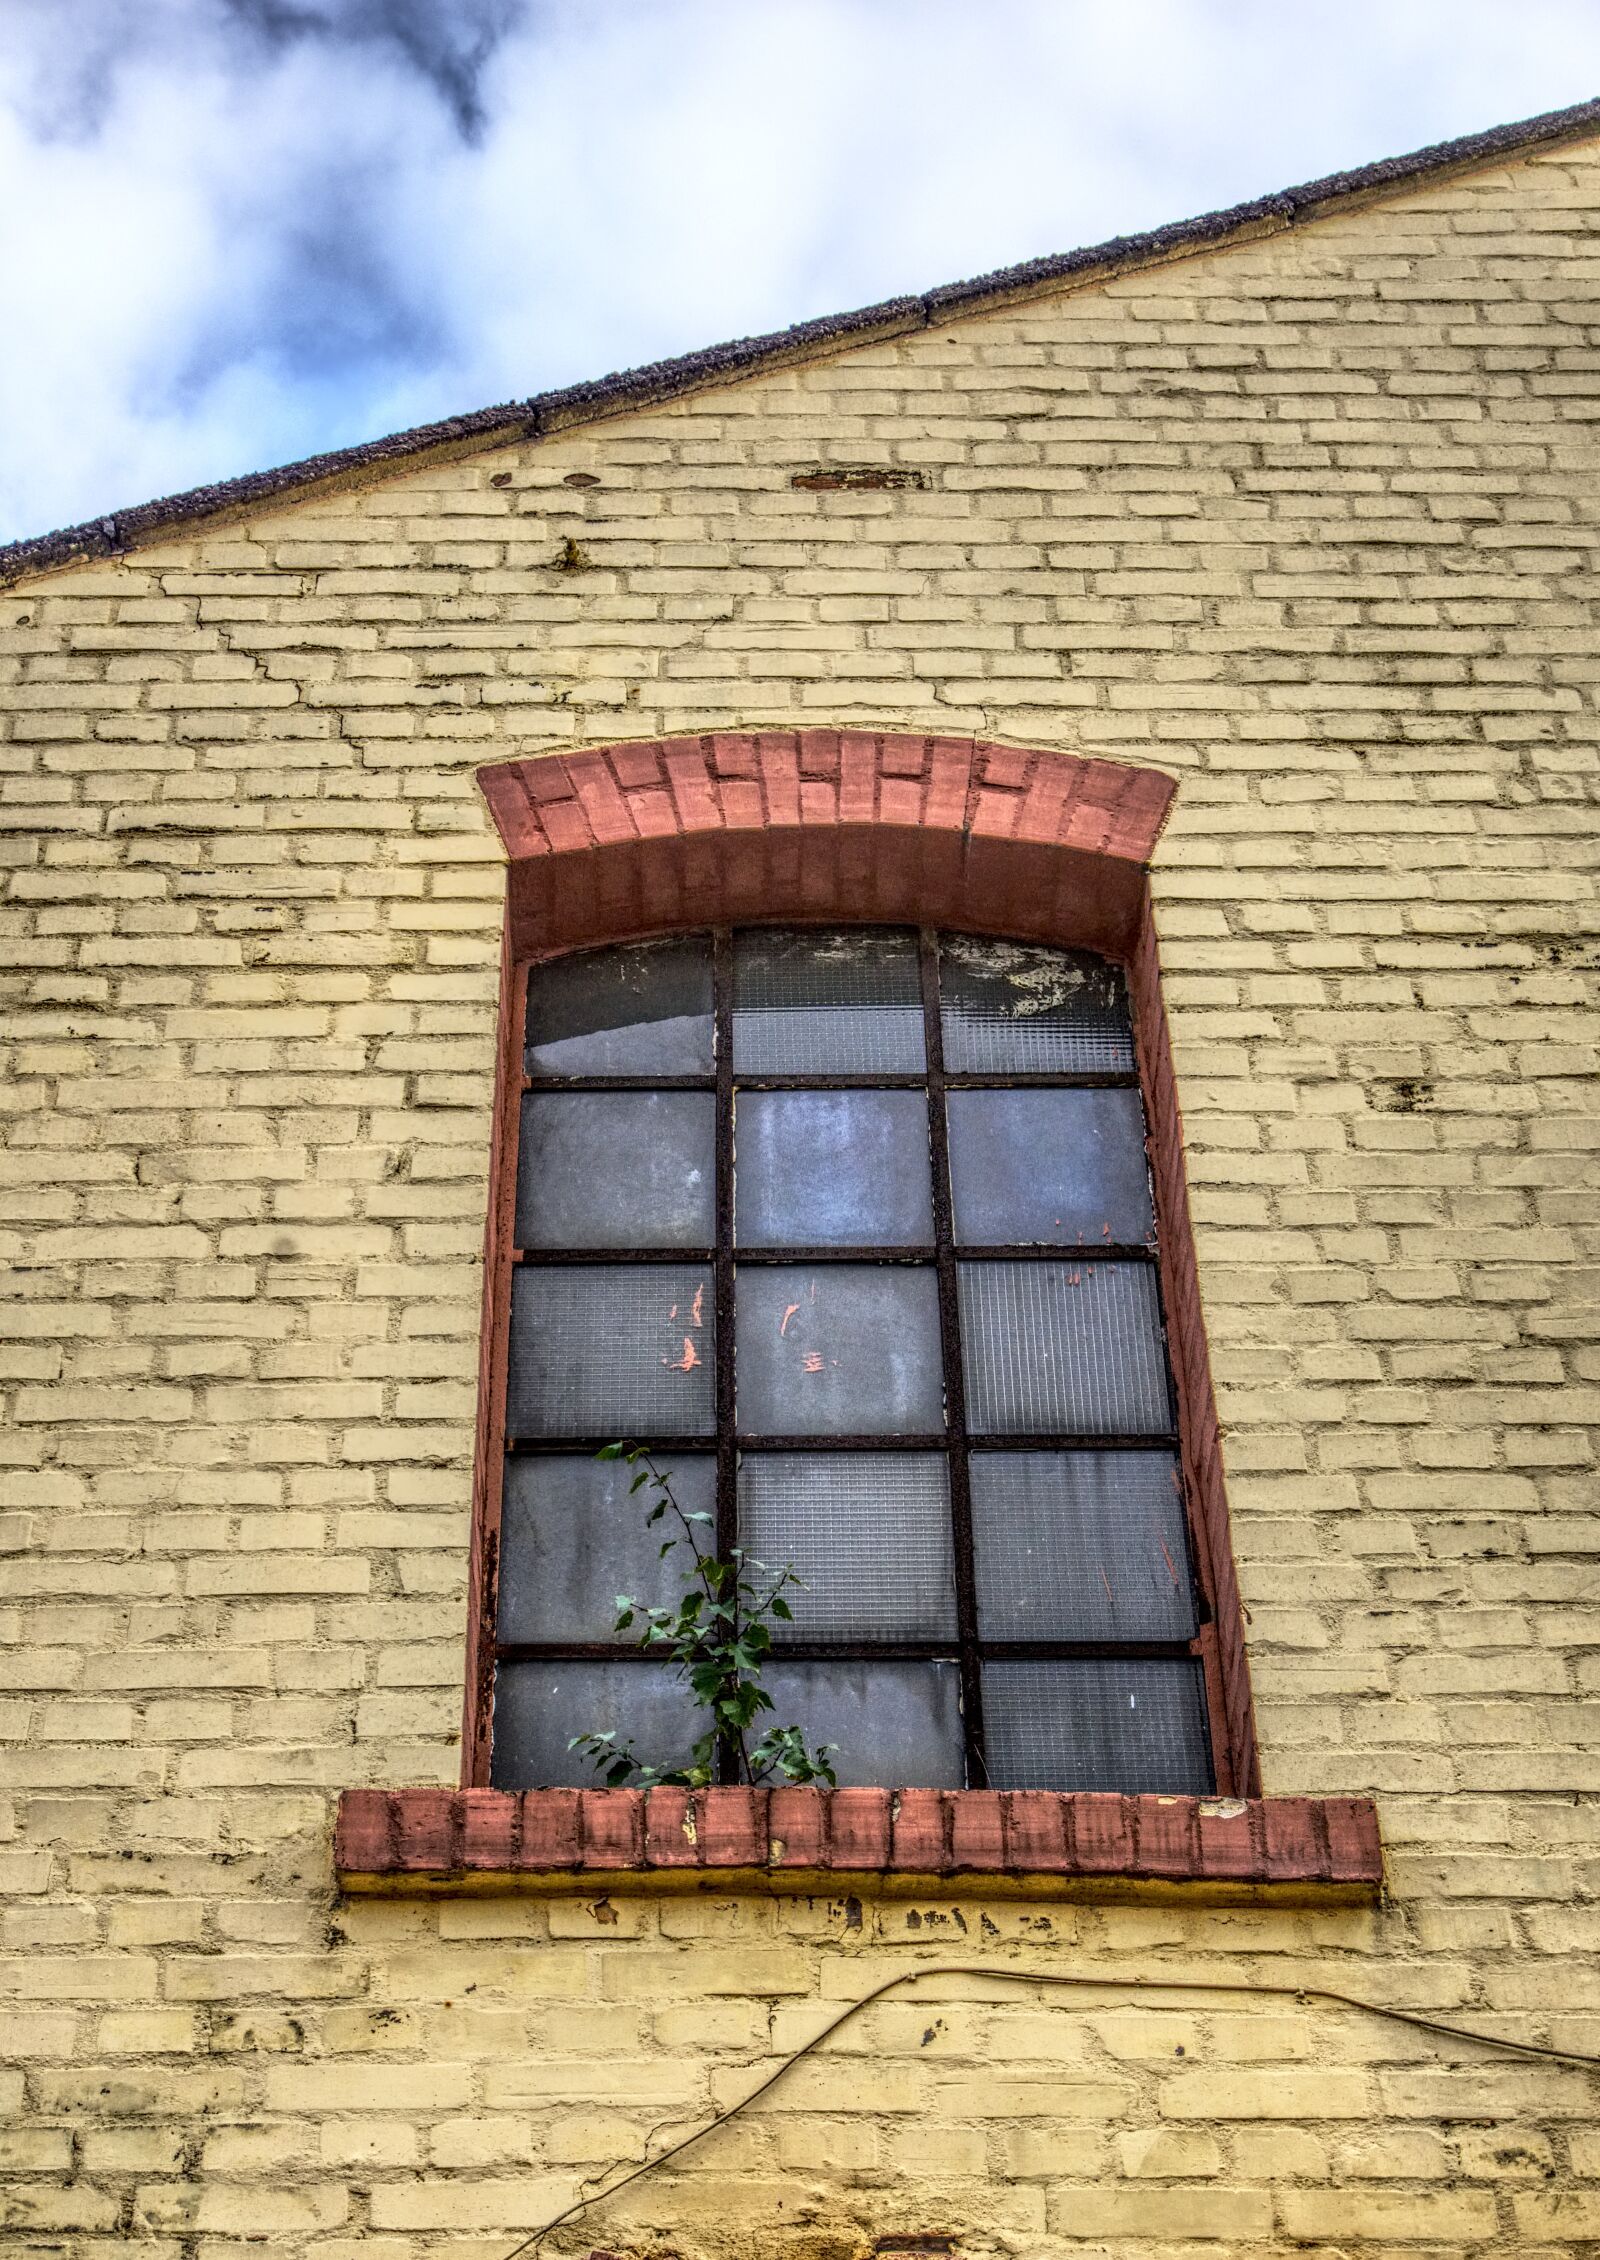 Sony a6000 sample photo. Window, industrial building, industrial photography